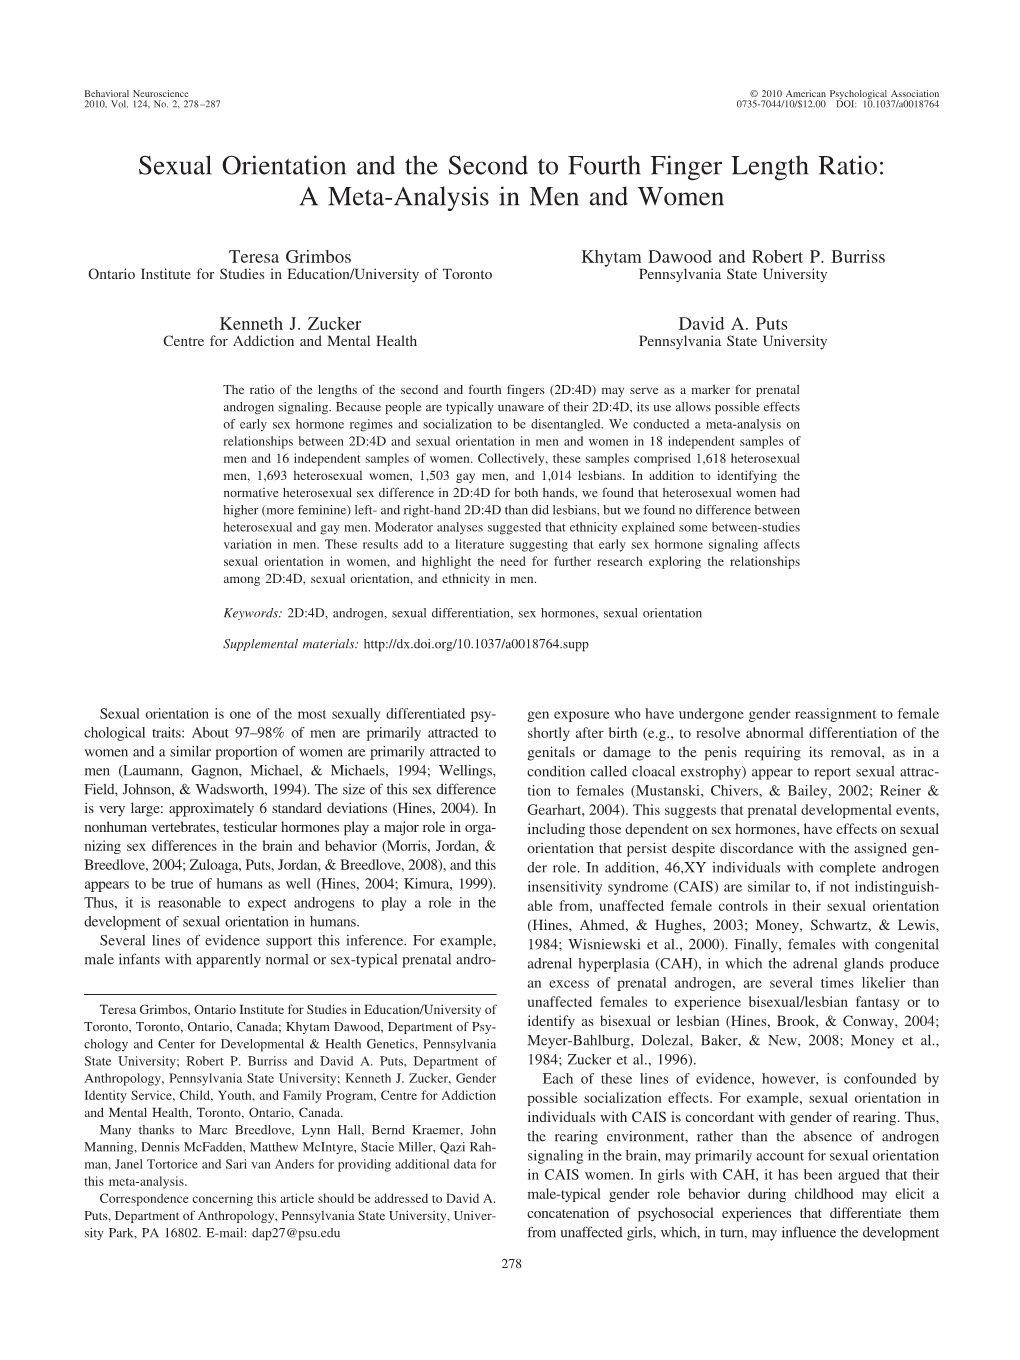 Sexual Orientation and the Second to Fourth Finger Length Ratio: a Meta-Analysis in Men and Women